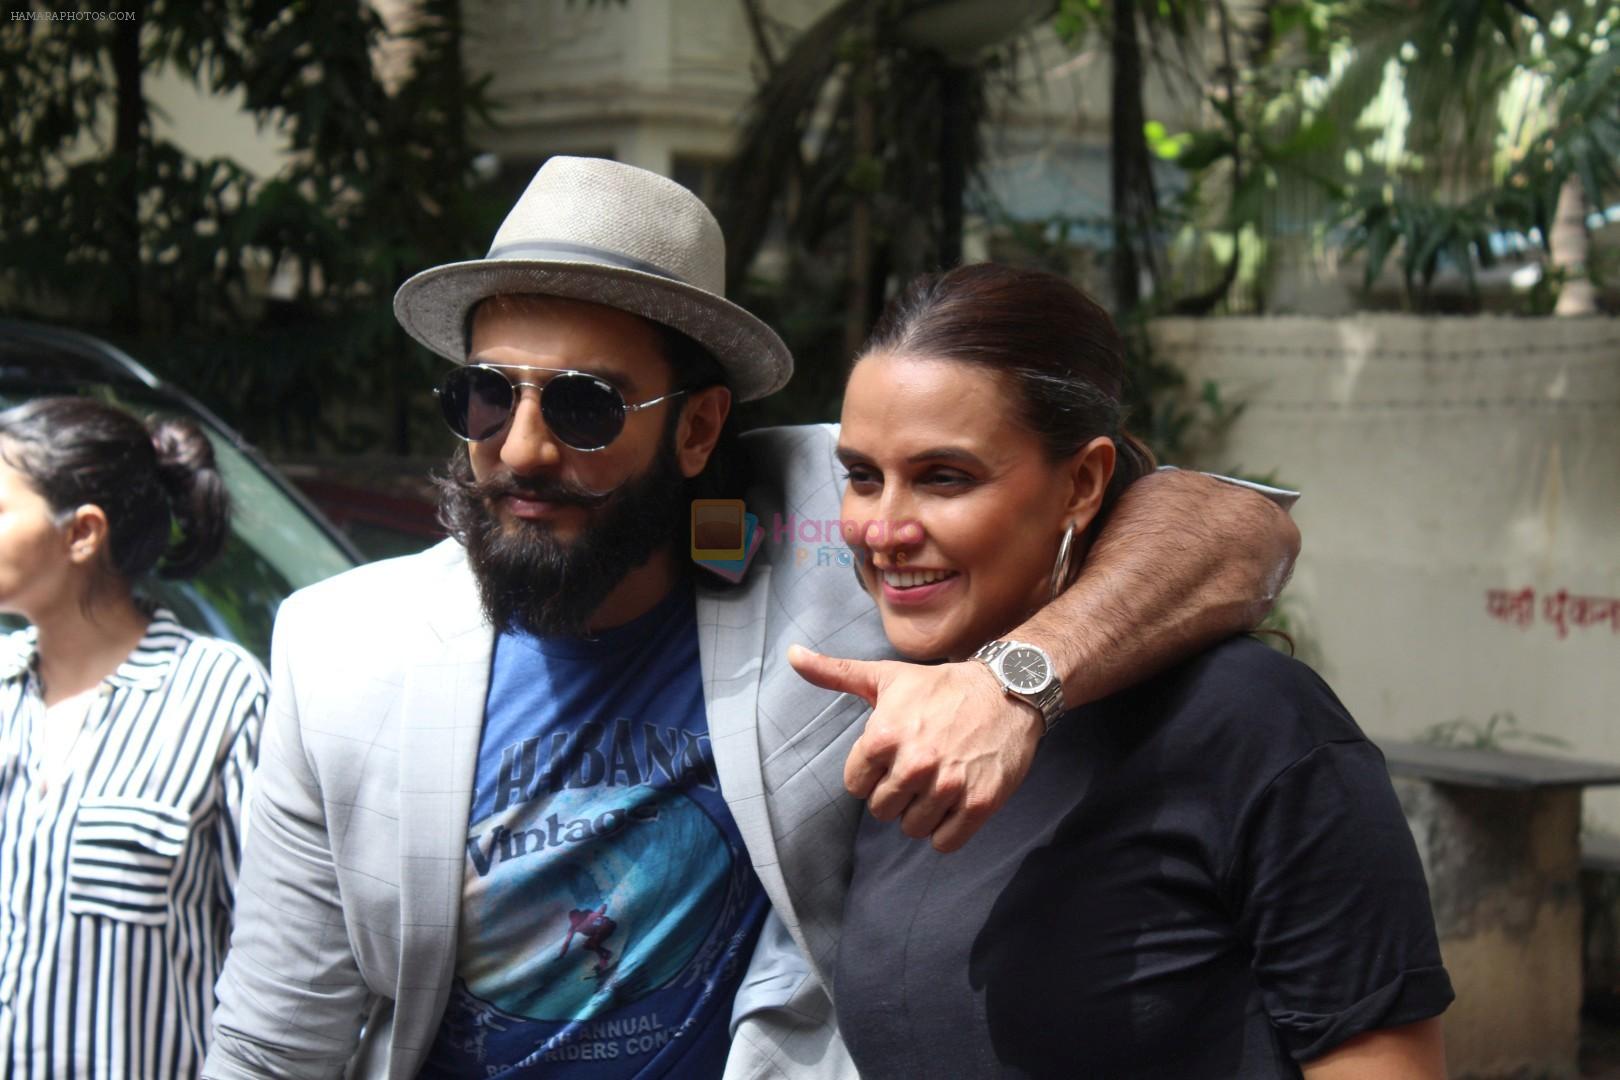 Ranveer Singh, Neha Dhupia Spotted before The Recording Of their Episode NoFilterNeha Season 2 on 10th July 2017